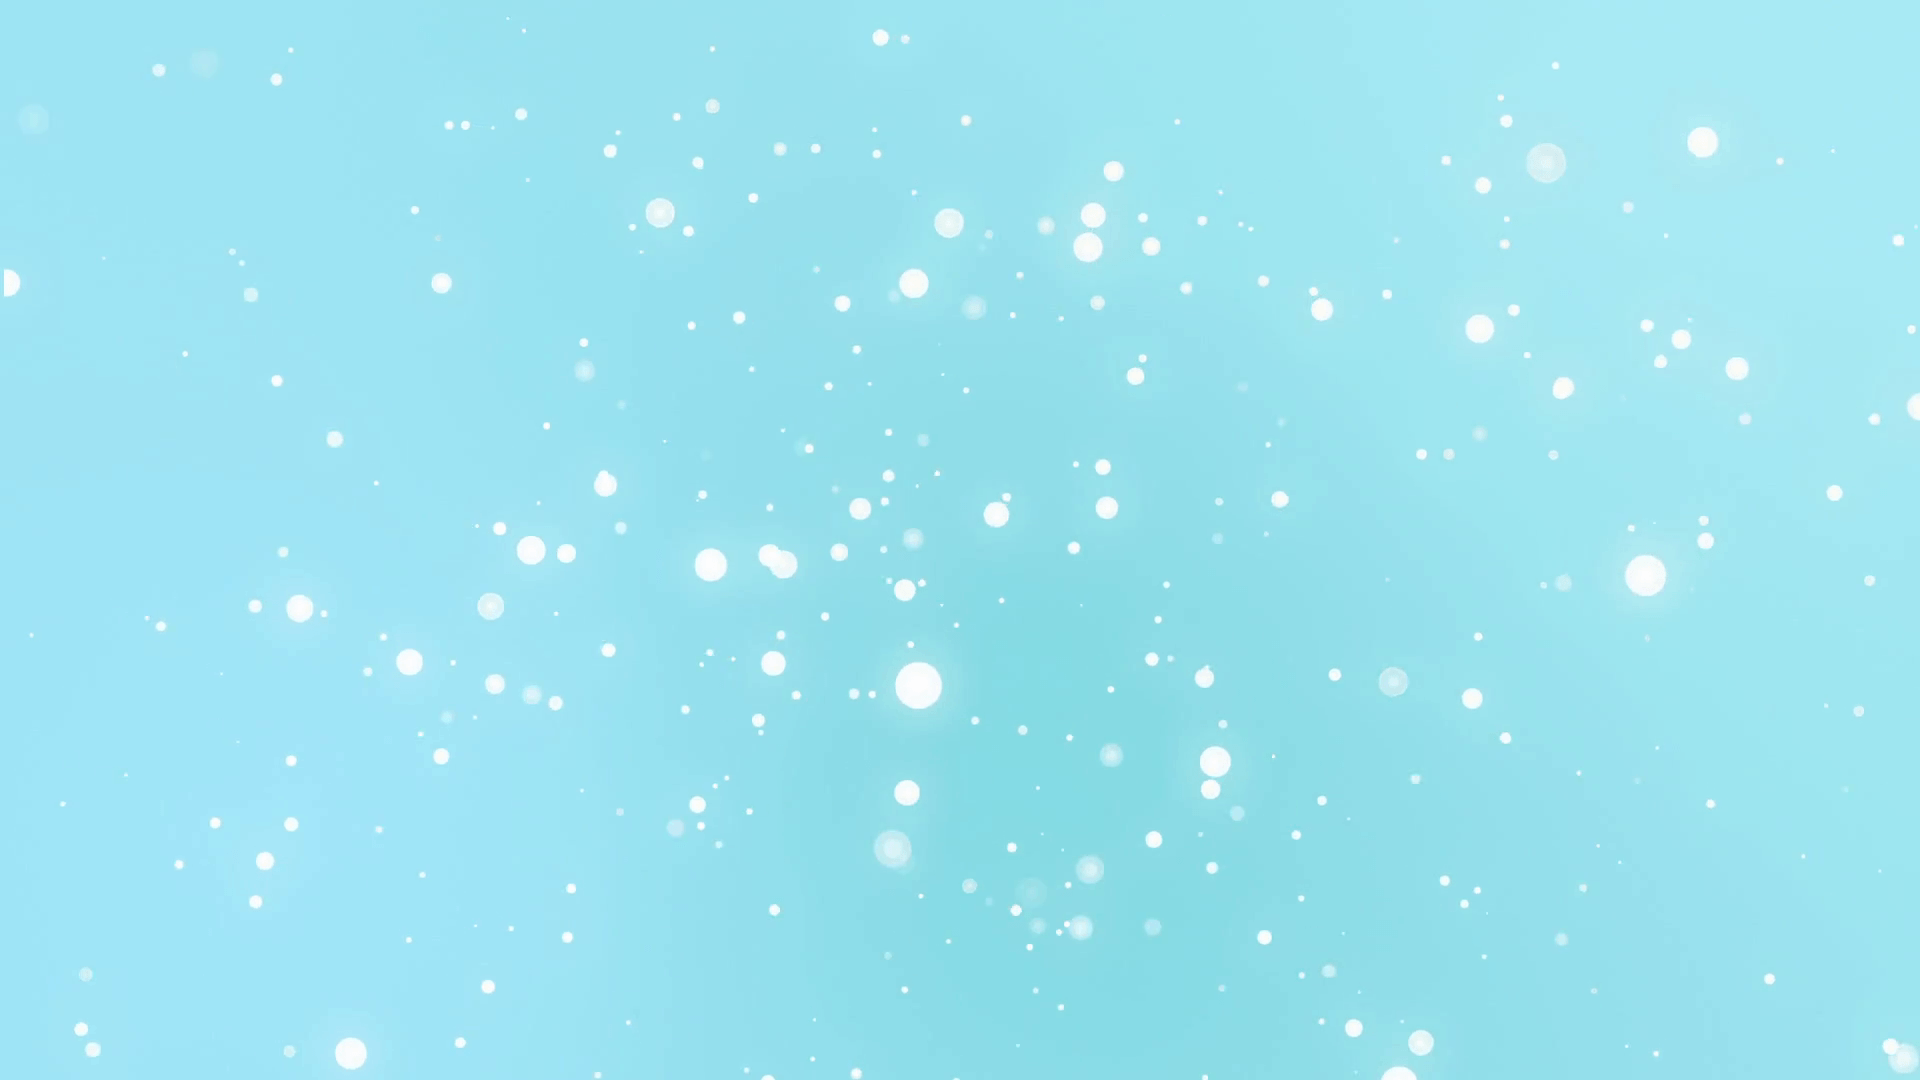 Sparkly light particles falling down a turquoise blue gradient